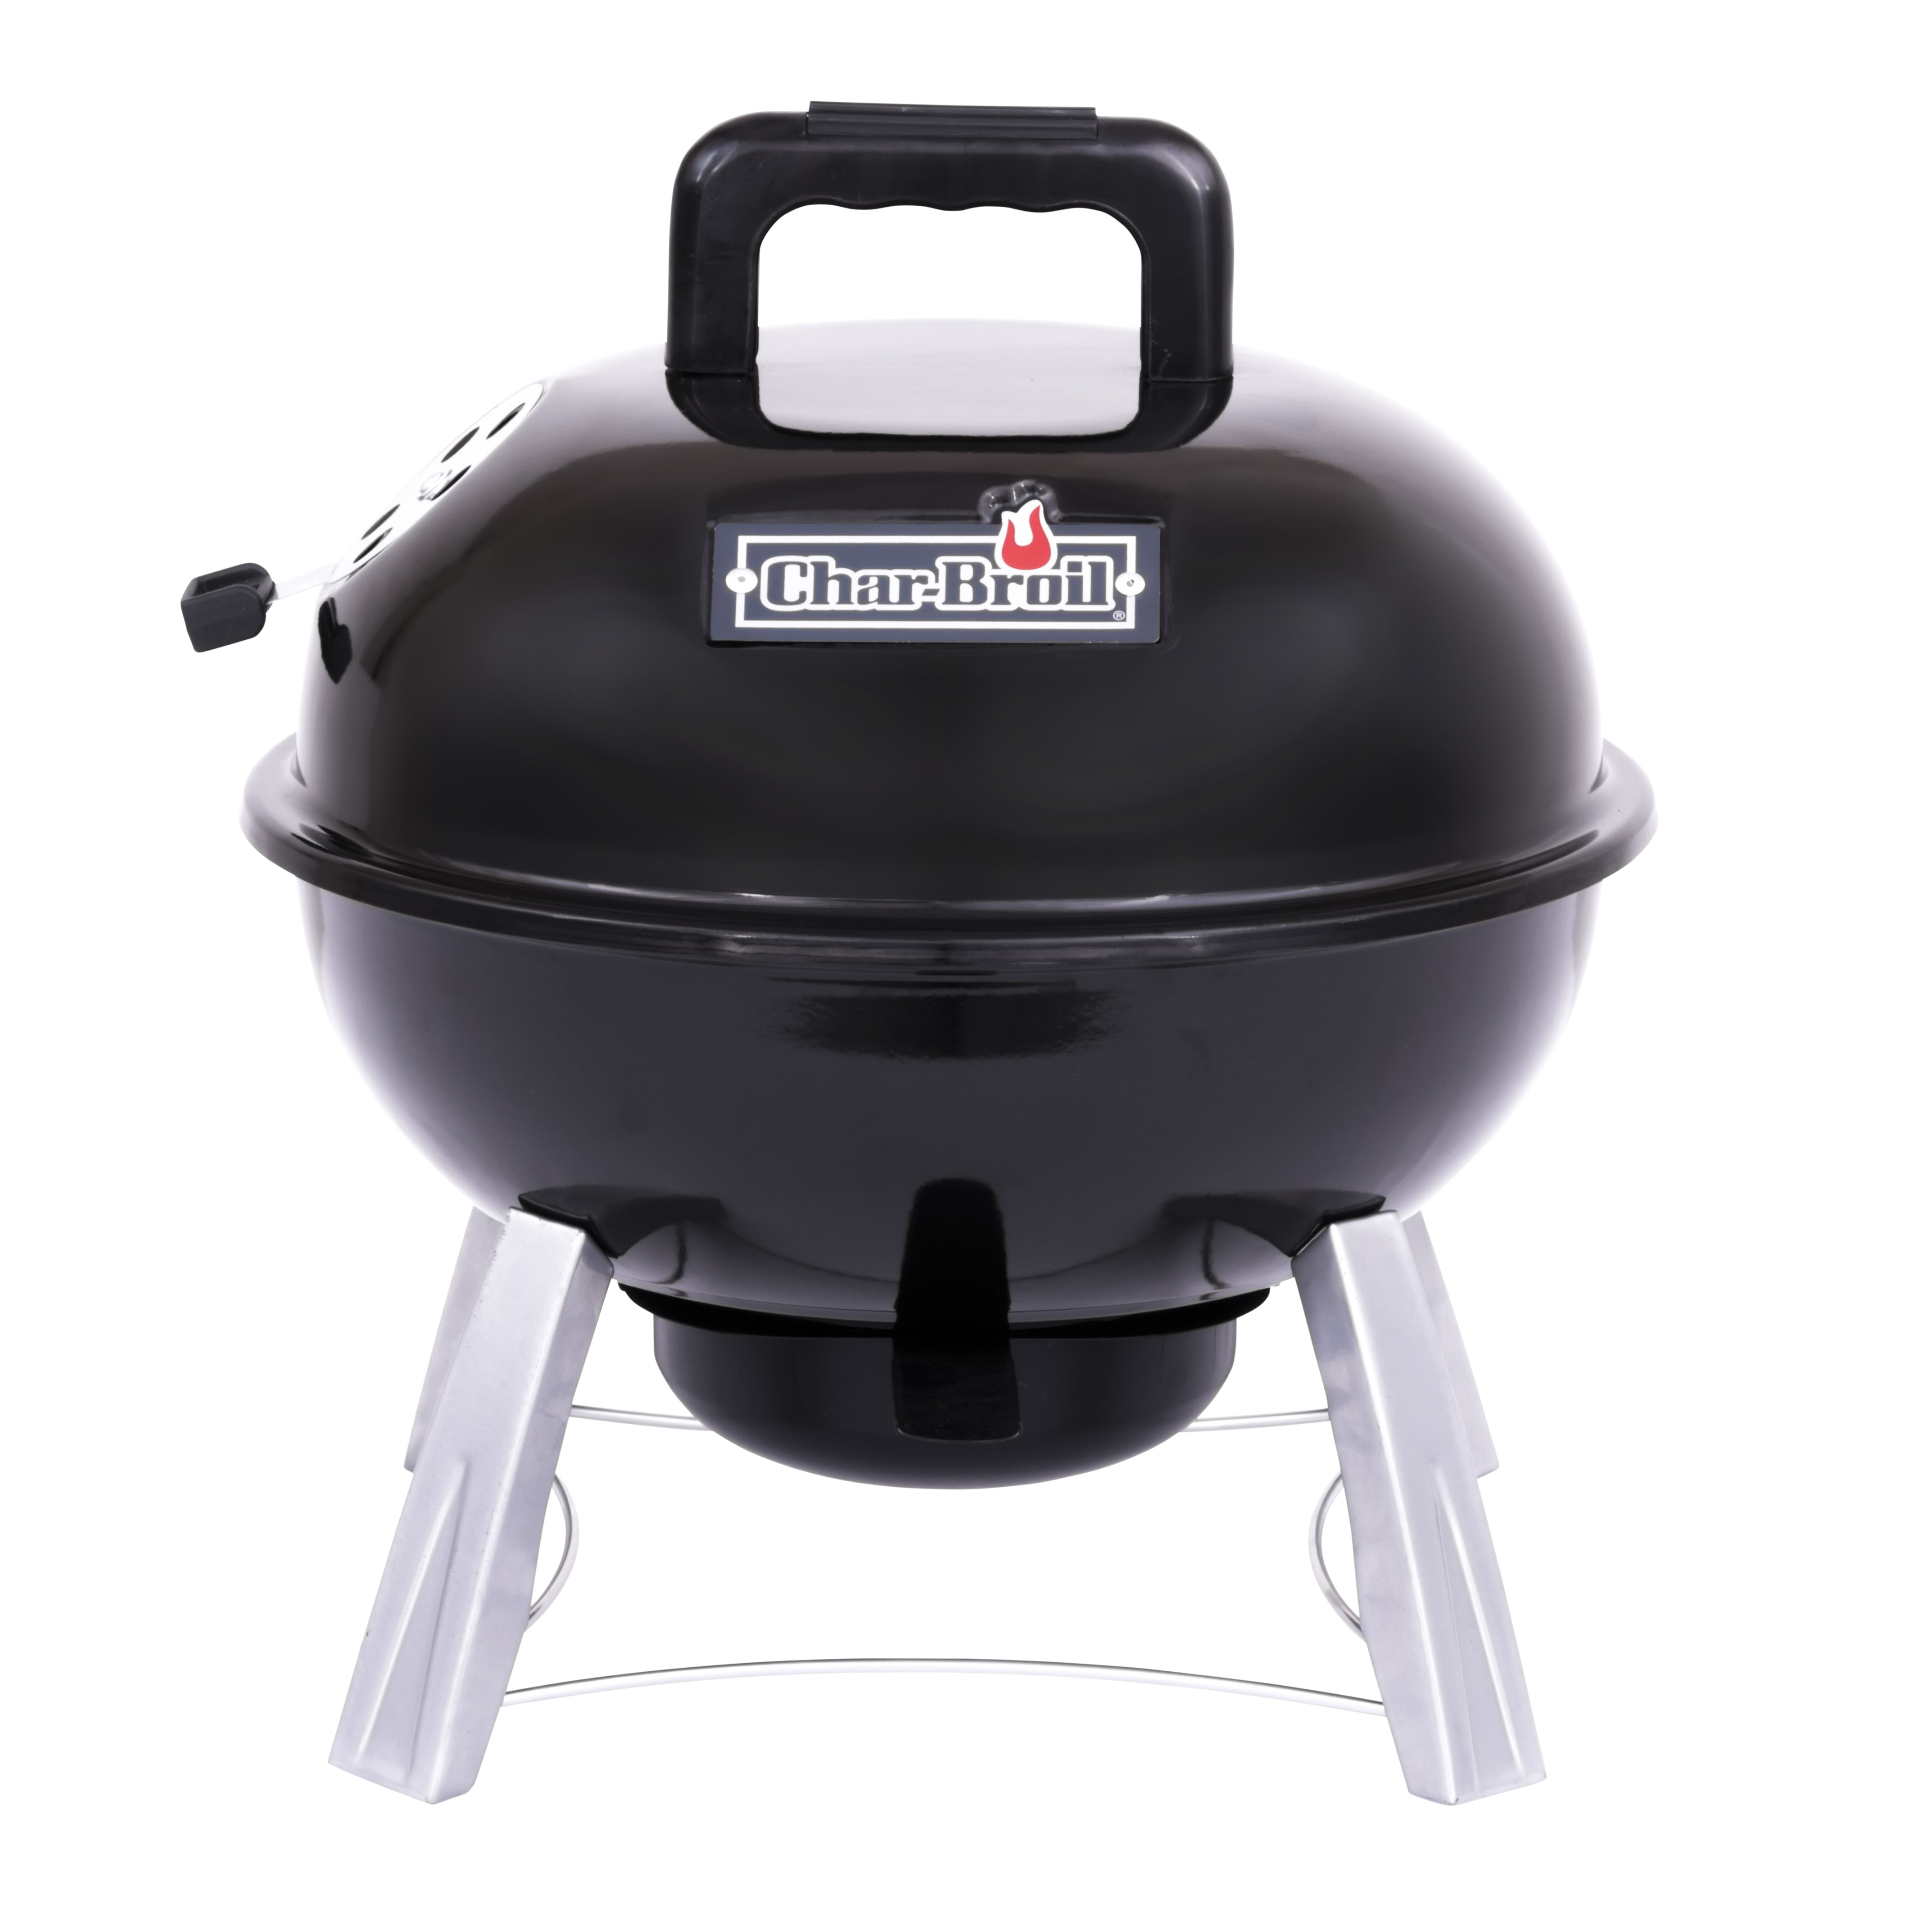 Tailgating & Travel Broil Optimized Portable Charcoal Grill Smoker RED Barbecue for Camping Smoke or Hibachi Go Anywhere With This Tabletop Outdoor BBQ Cooker and Char-Grill Raptor Grilling